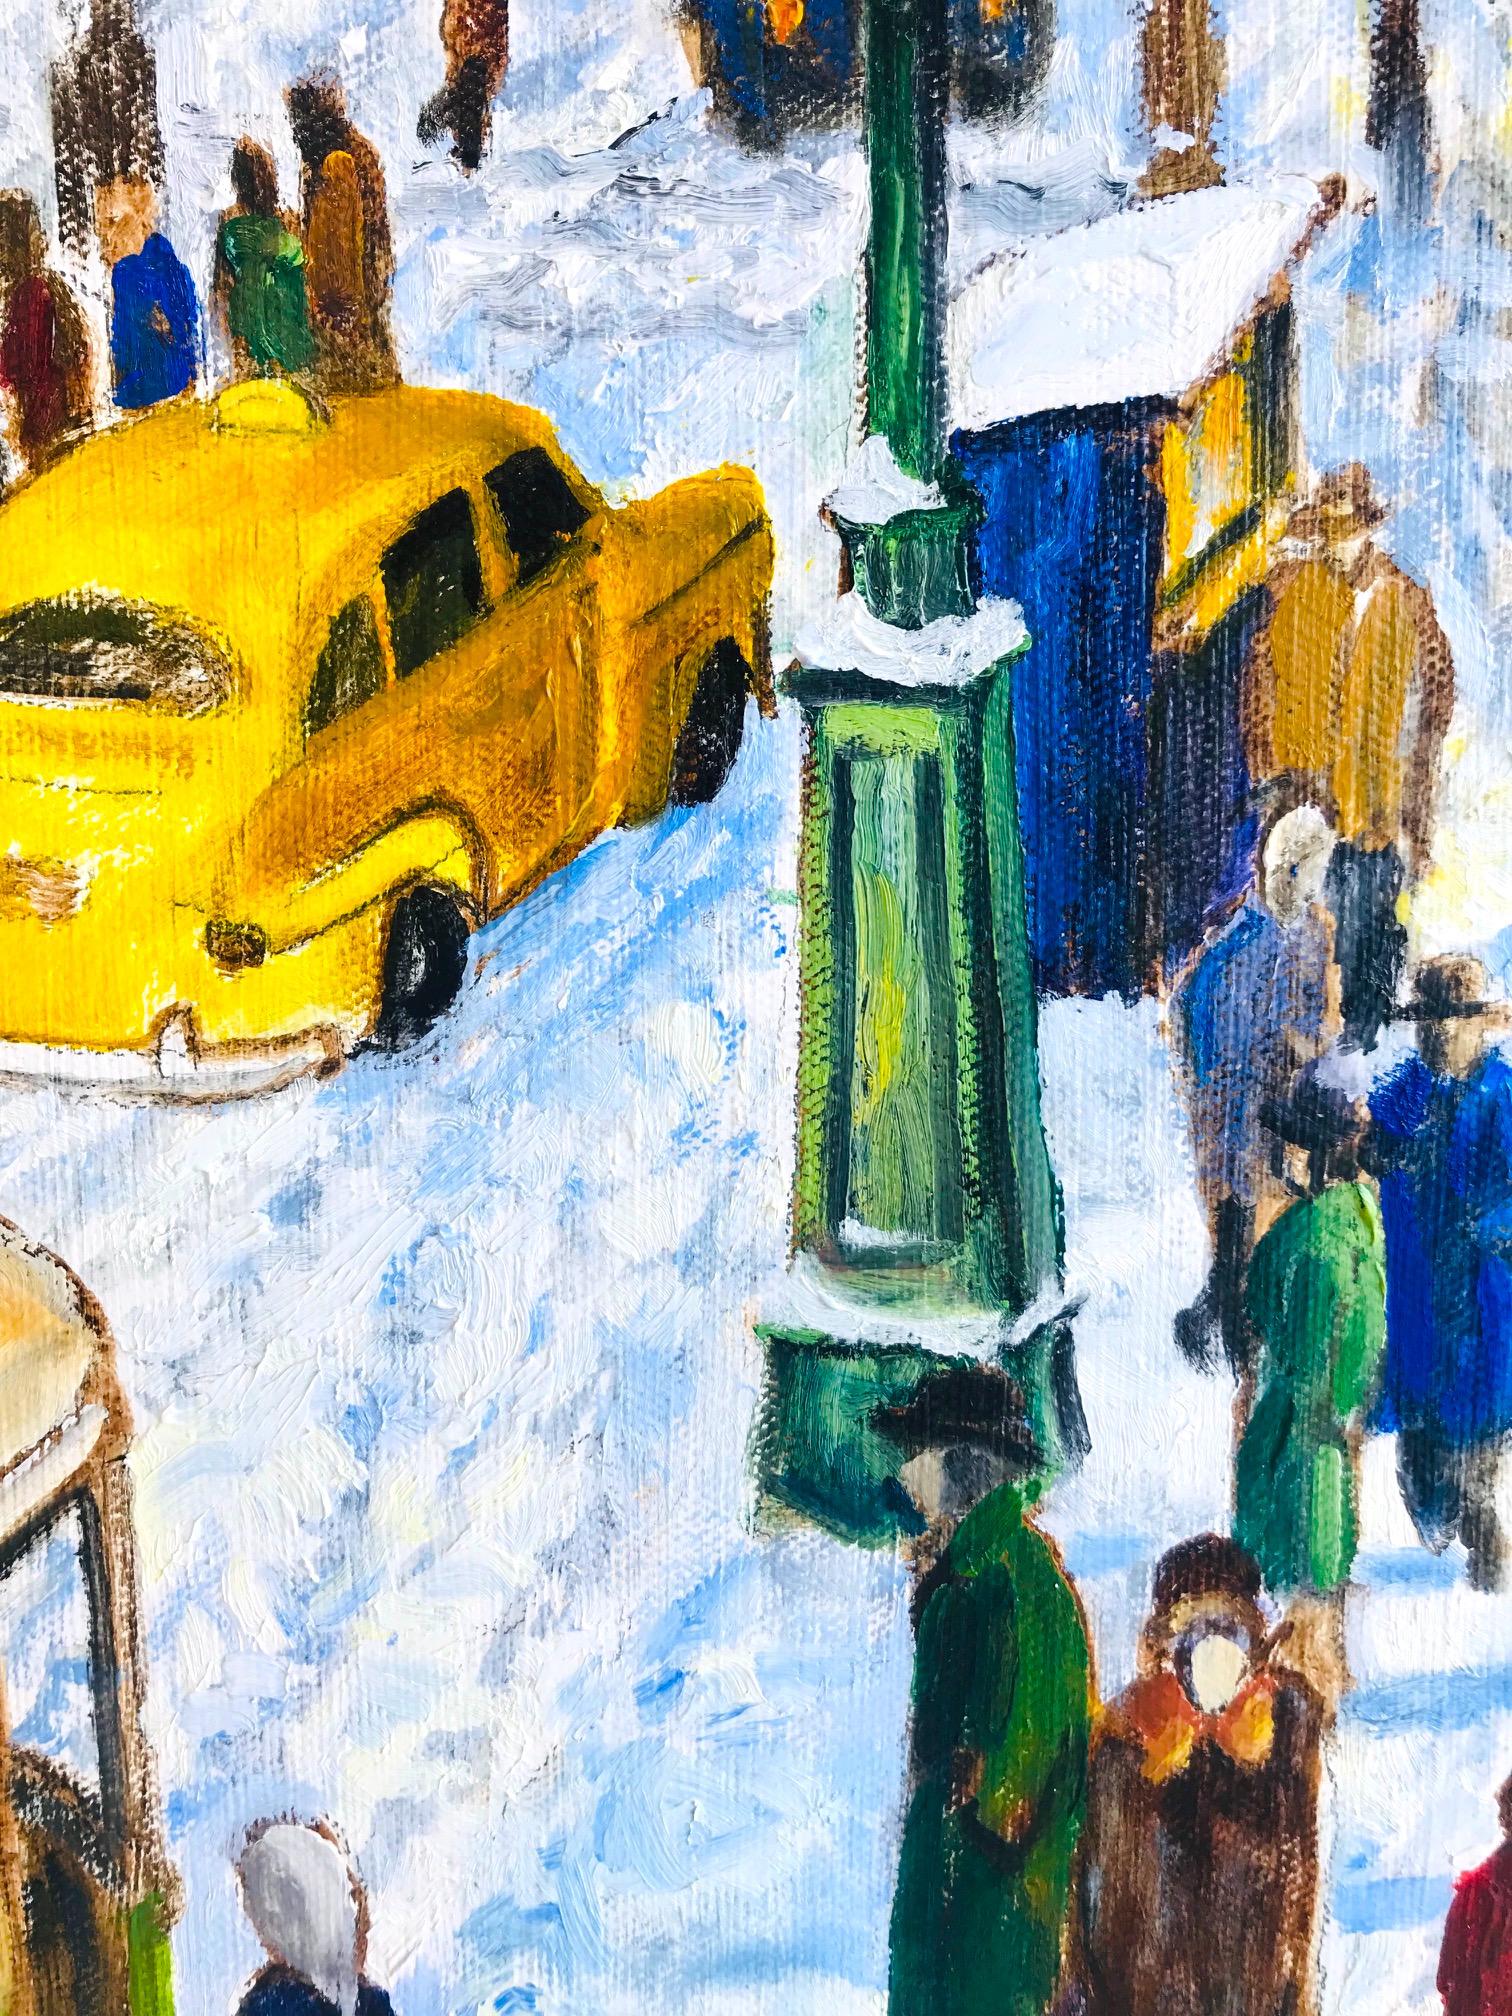 Impressionist Painting of 1950s New York City at 42nd Street, Oil on Canvas 1